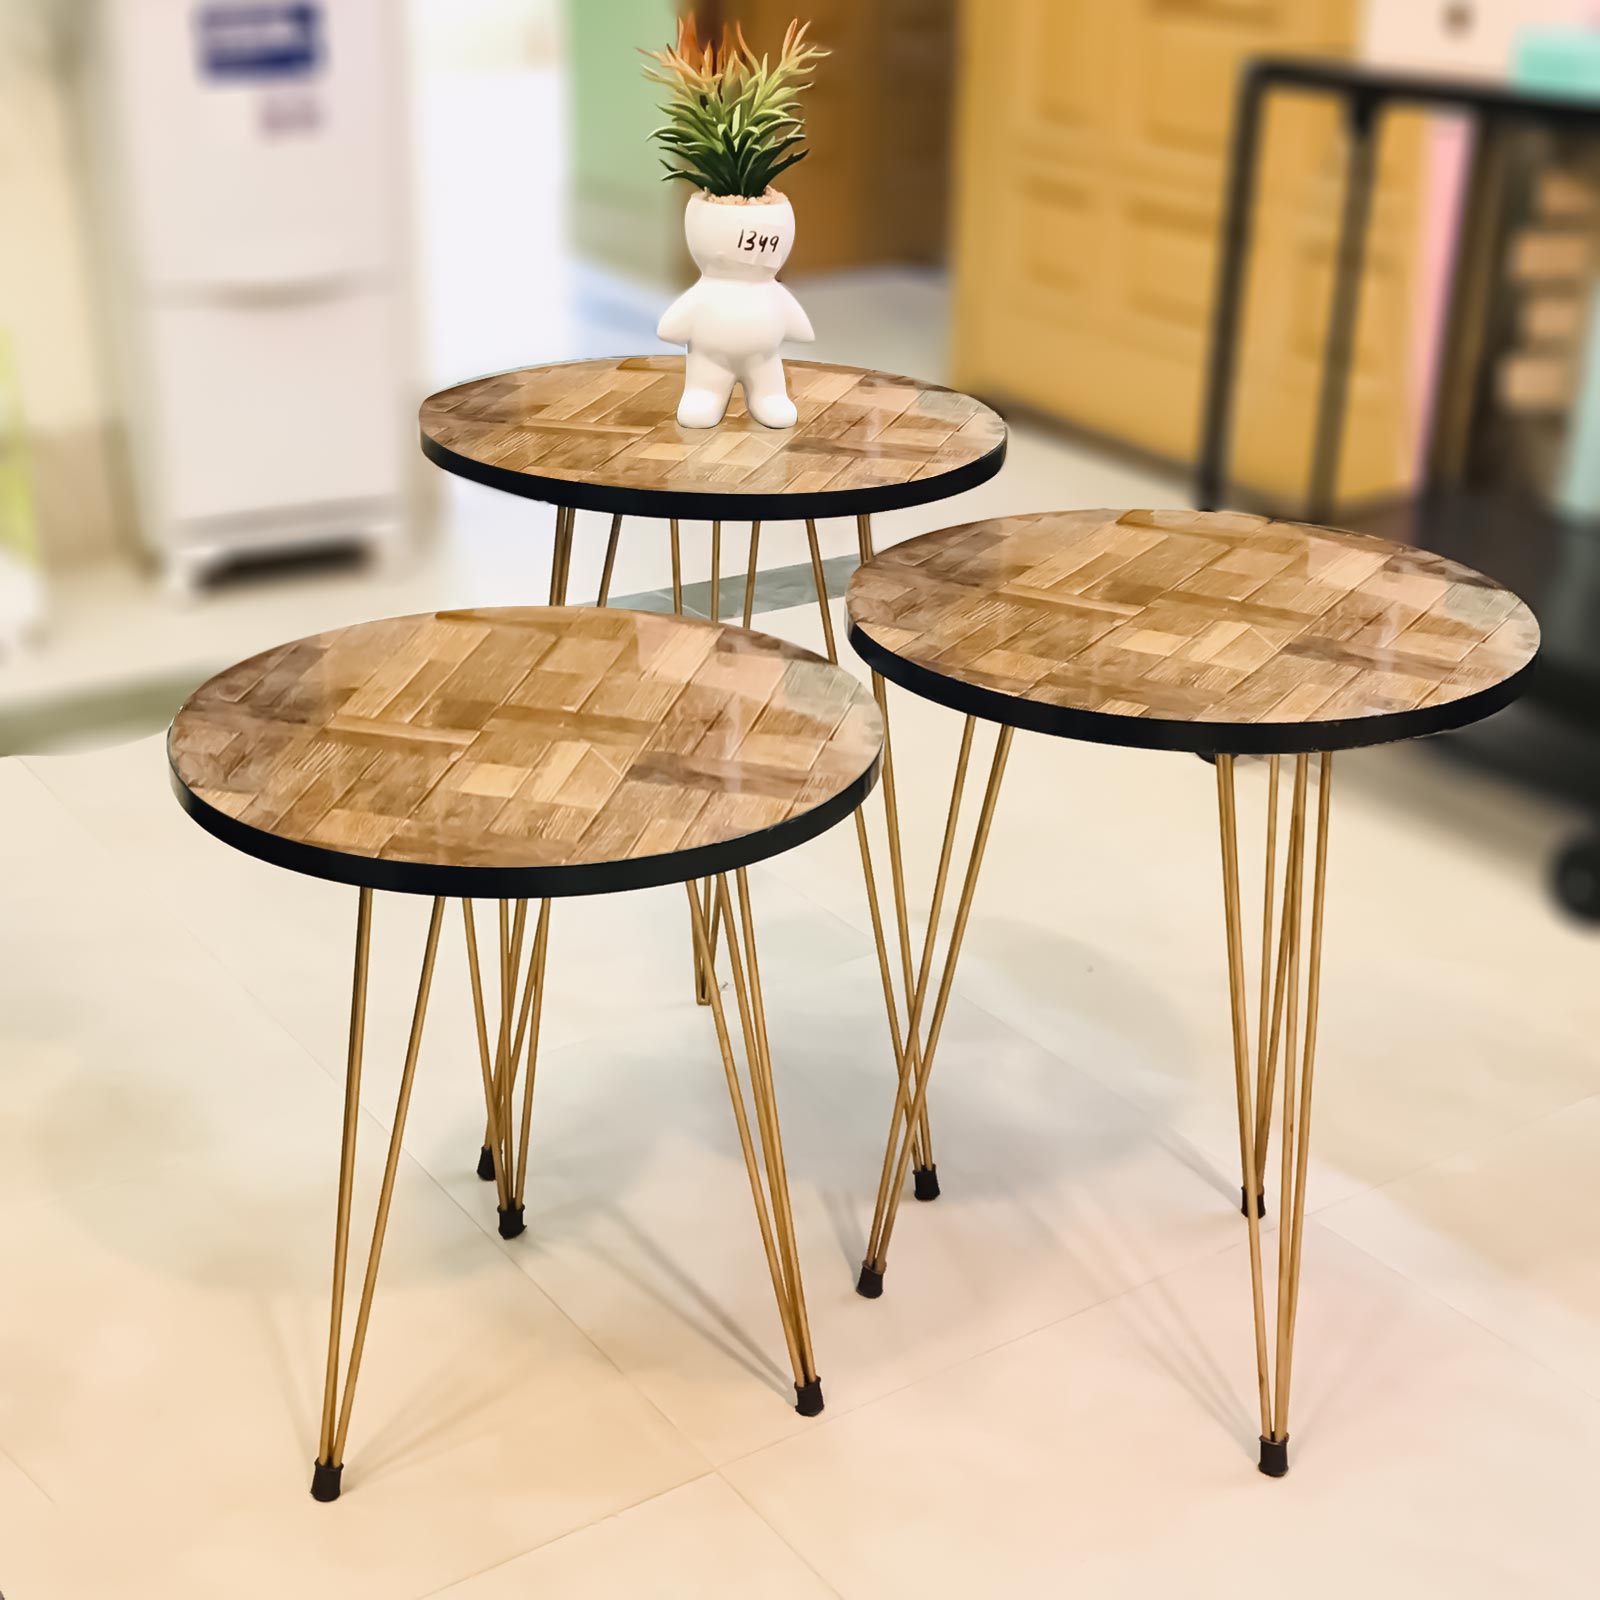 3 pcs table set with wooden top